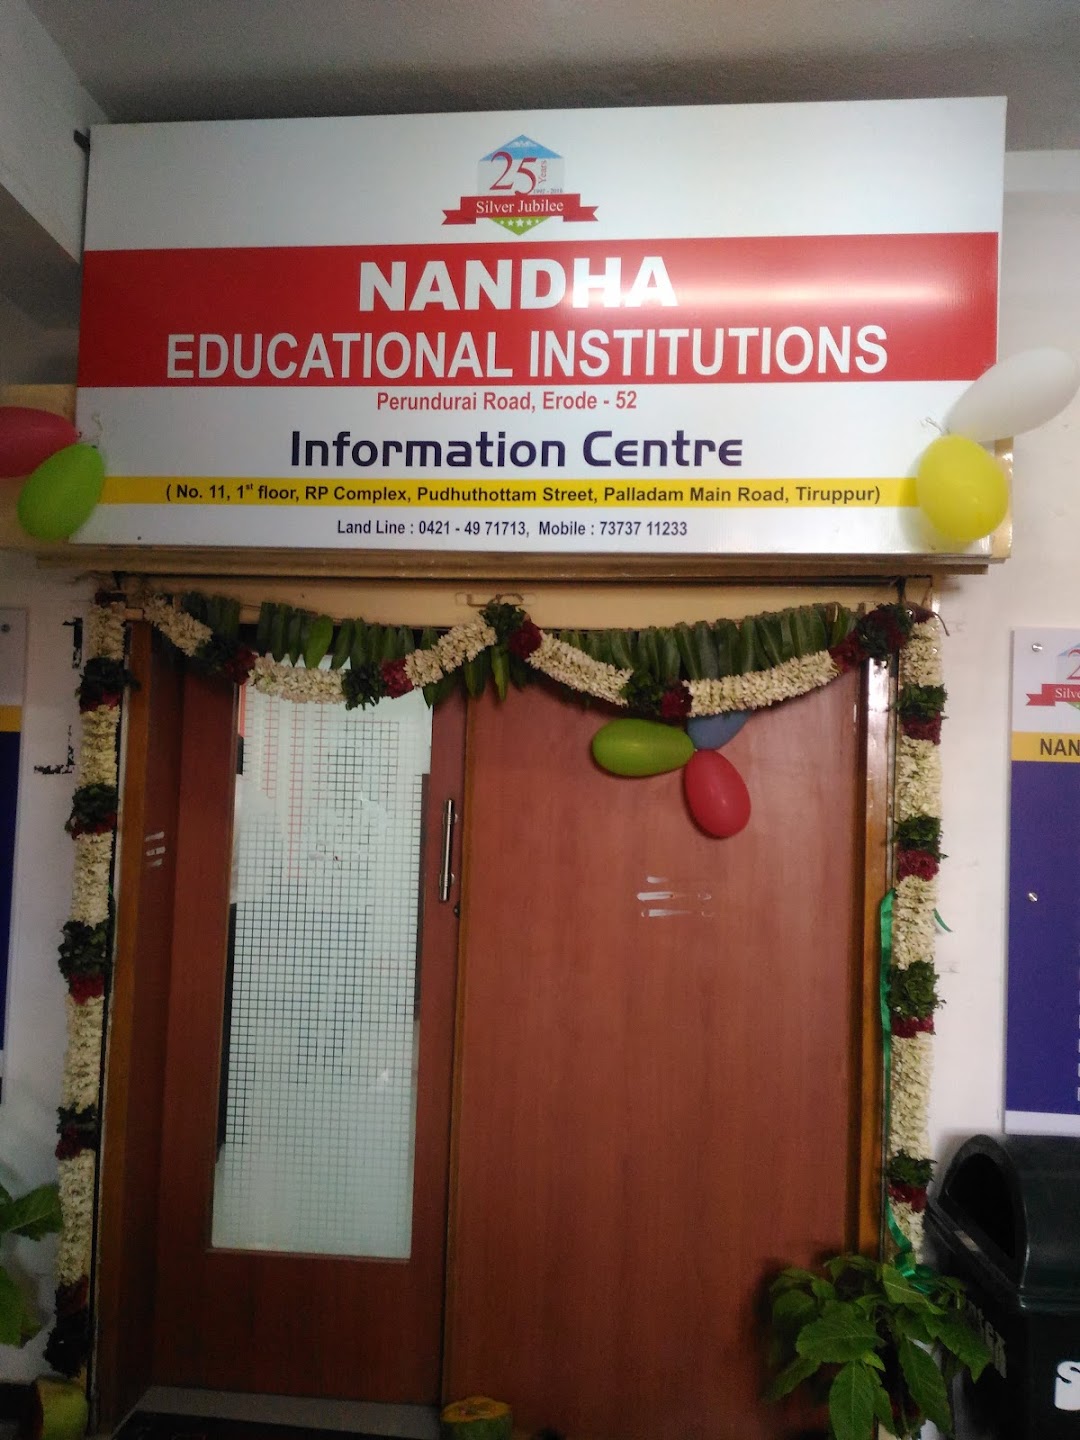 Nandha Educarional Institutions - Information Centre